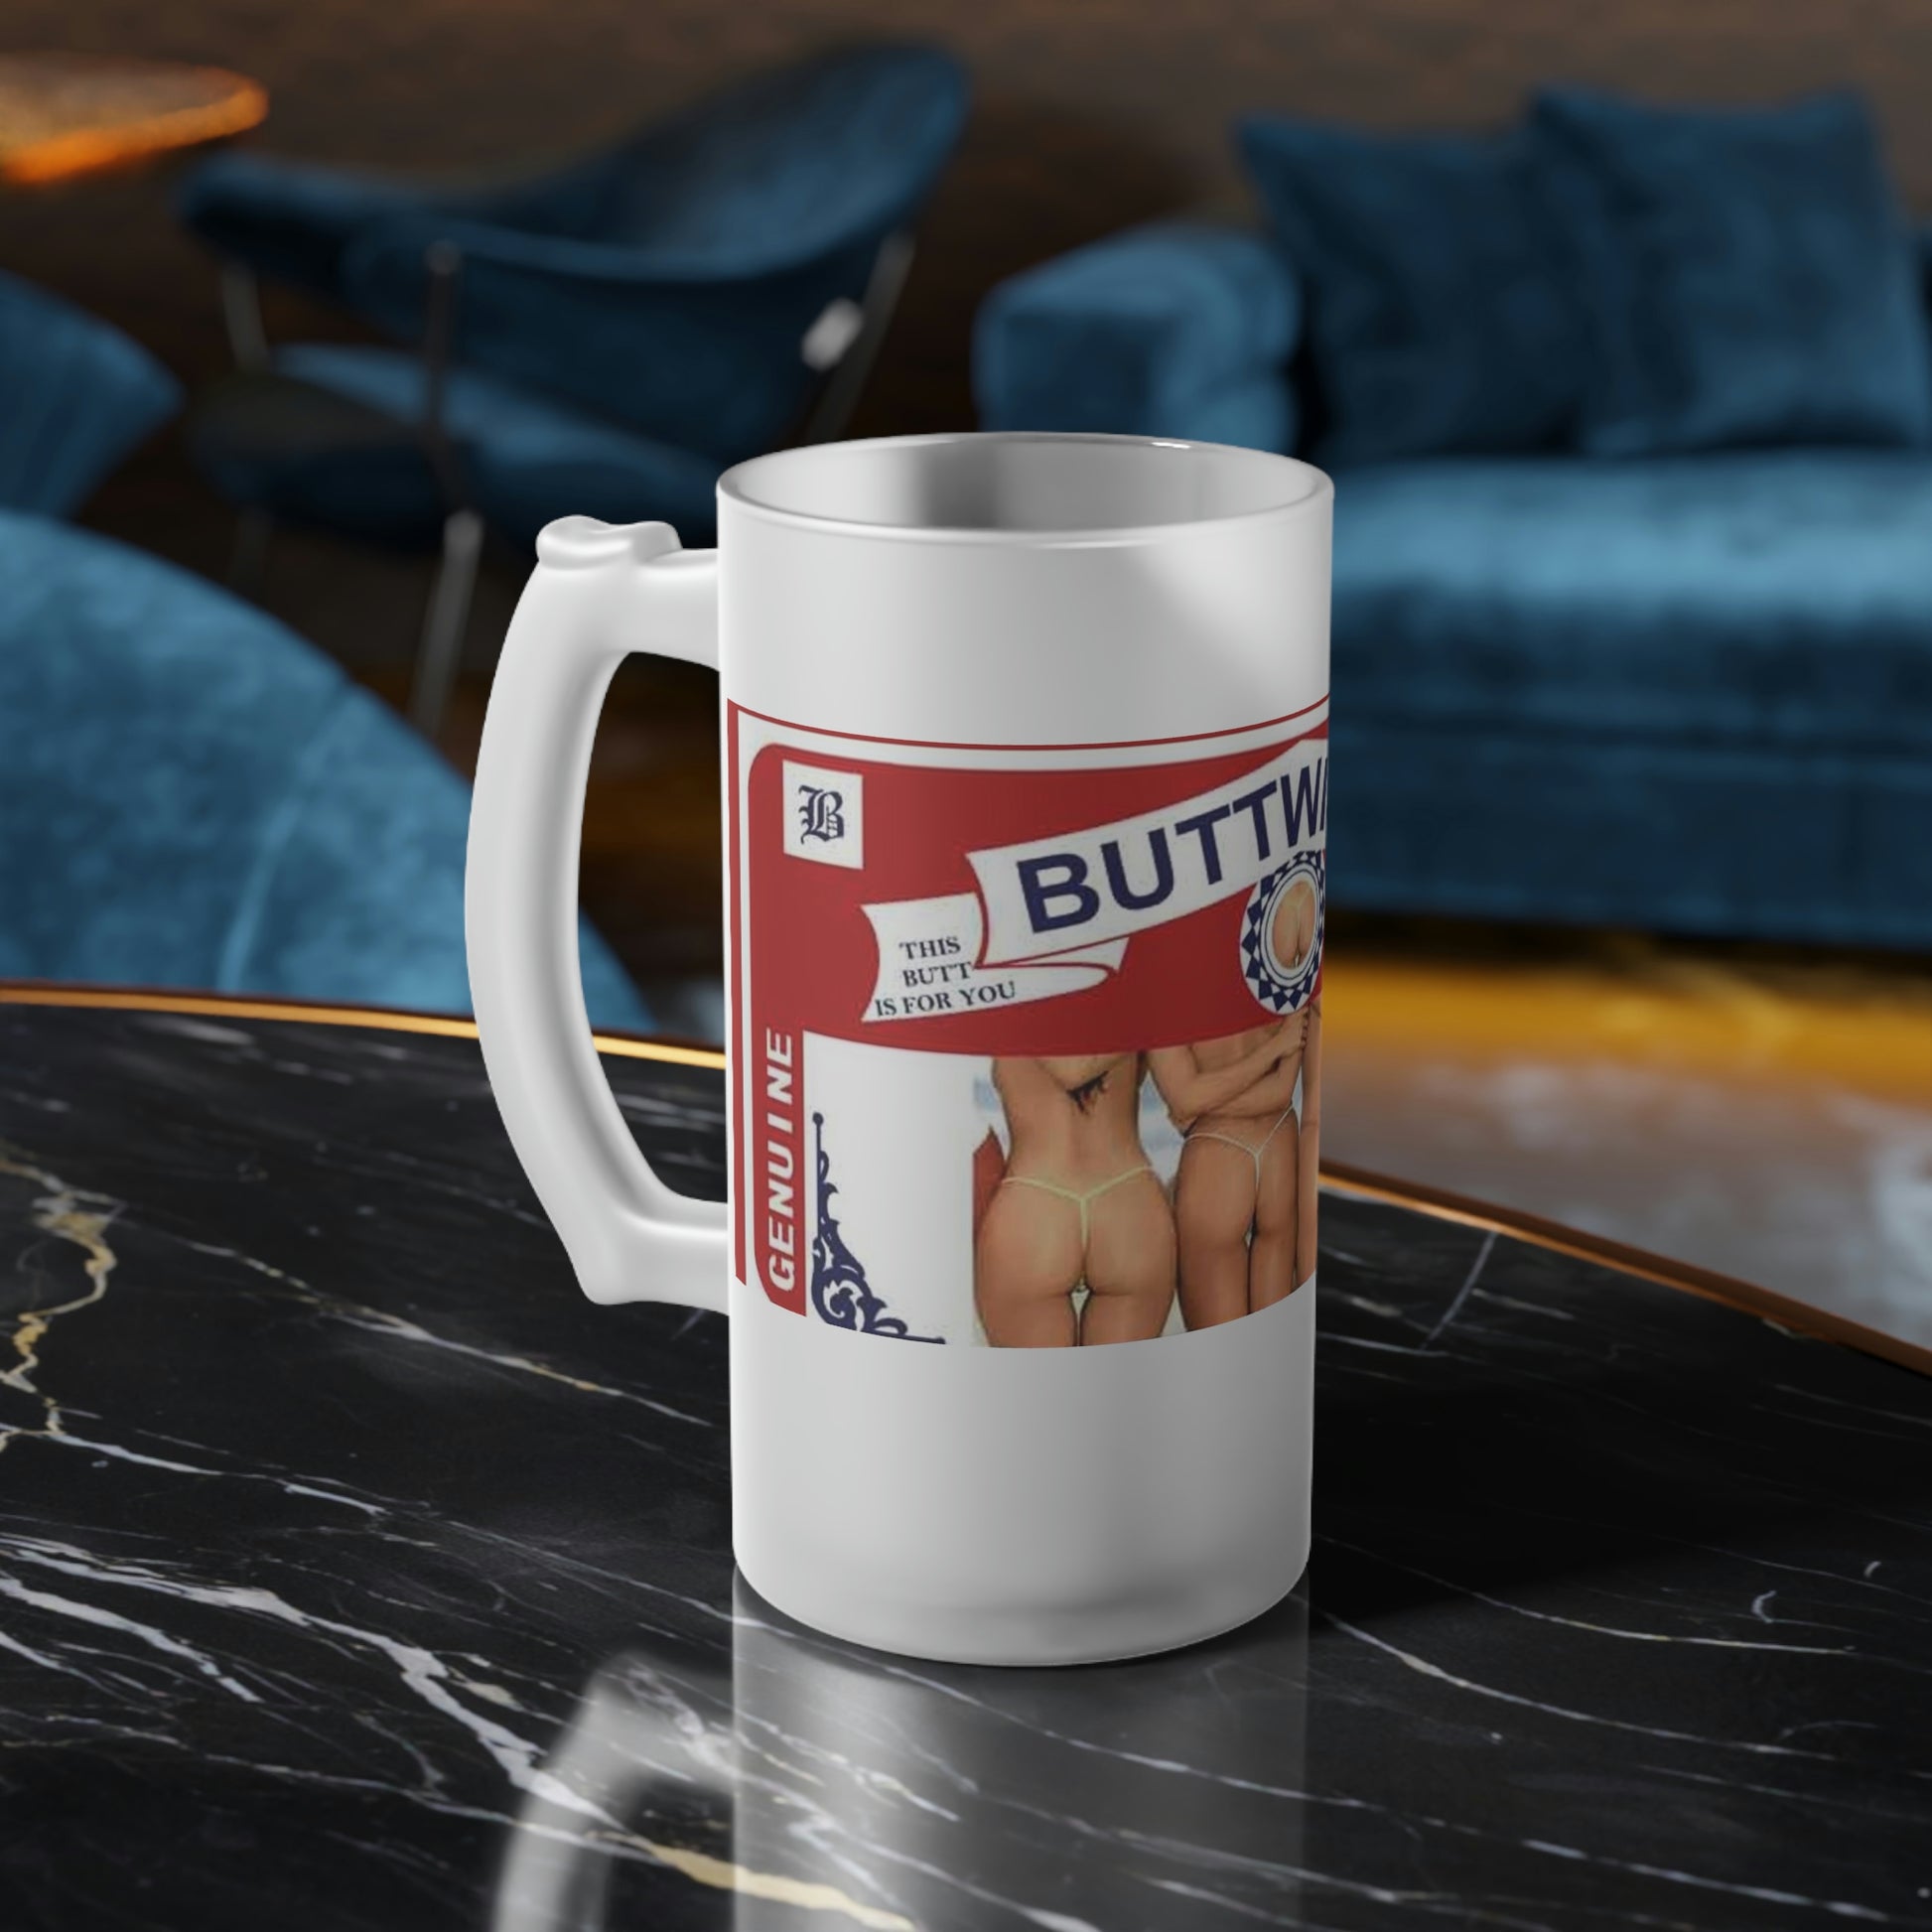 Buttwiser Frosted Glass Beer Mug In Living Room